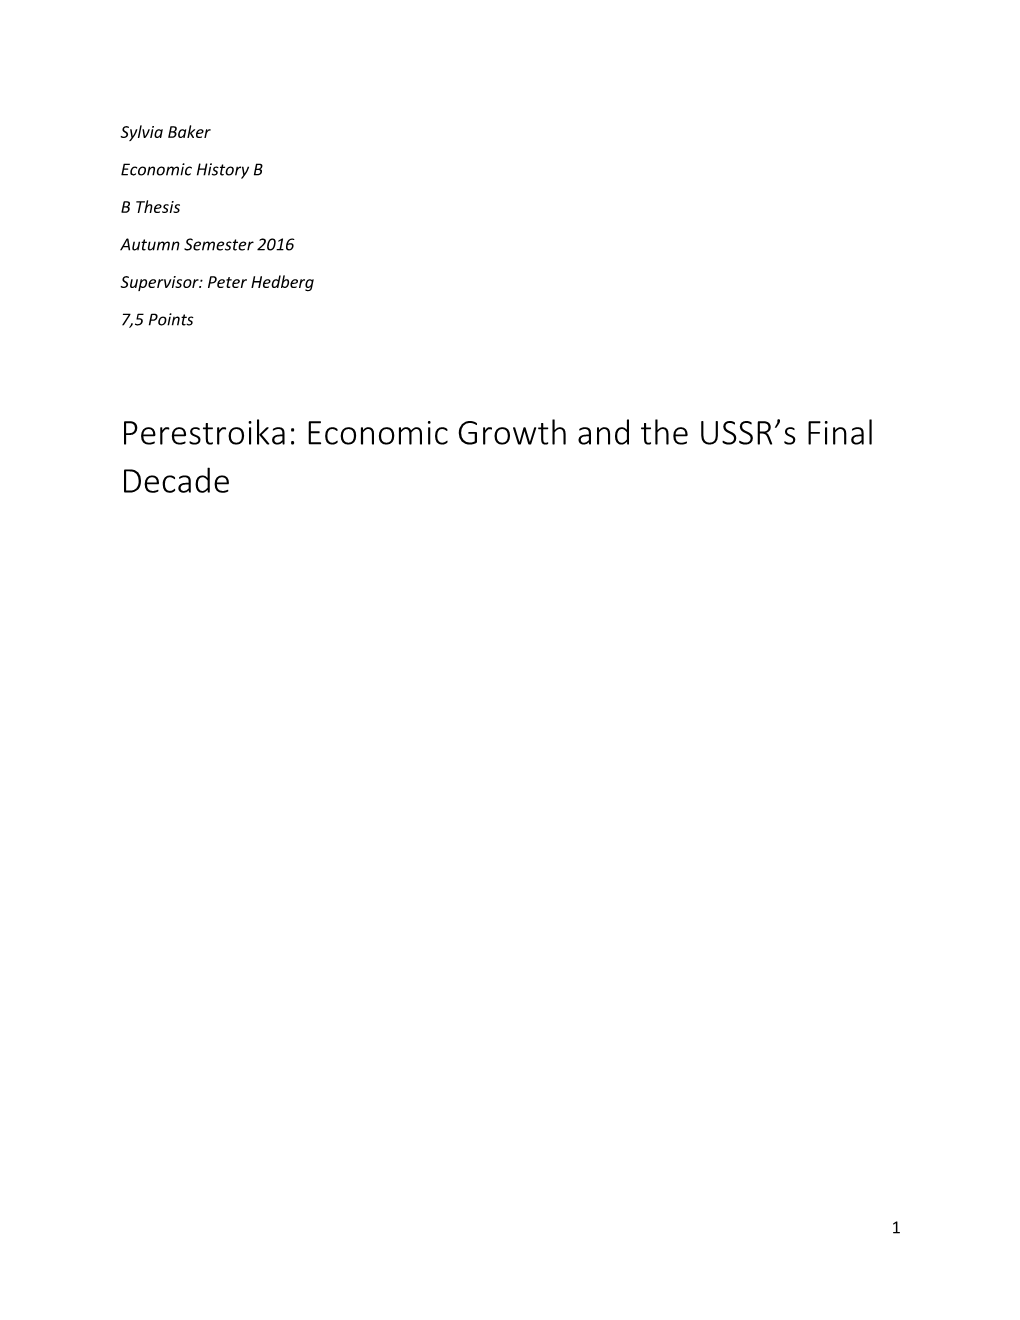 Perestroika: Economic Growth and the USSR's Final Decade